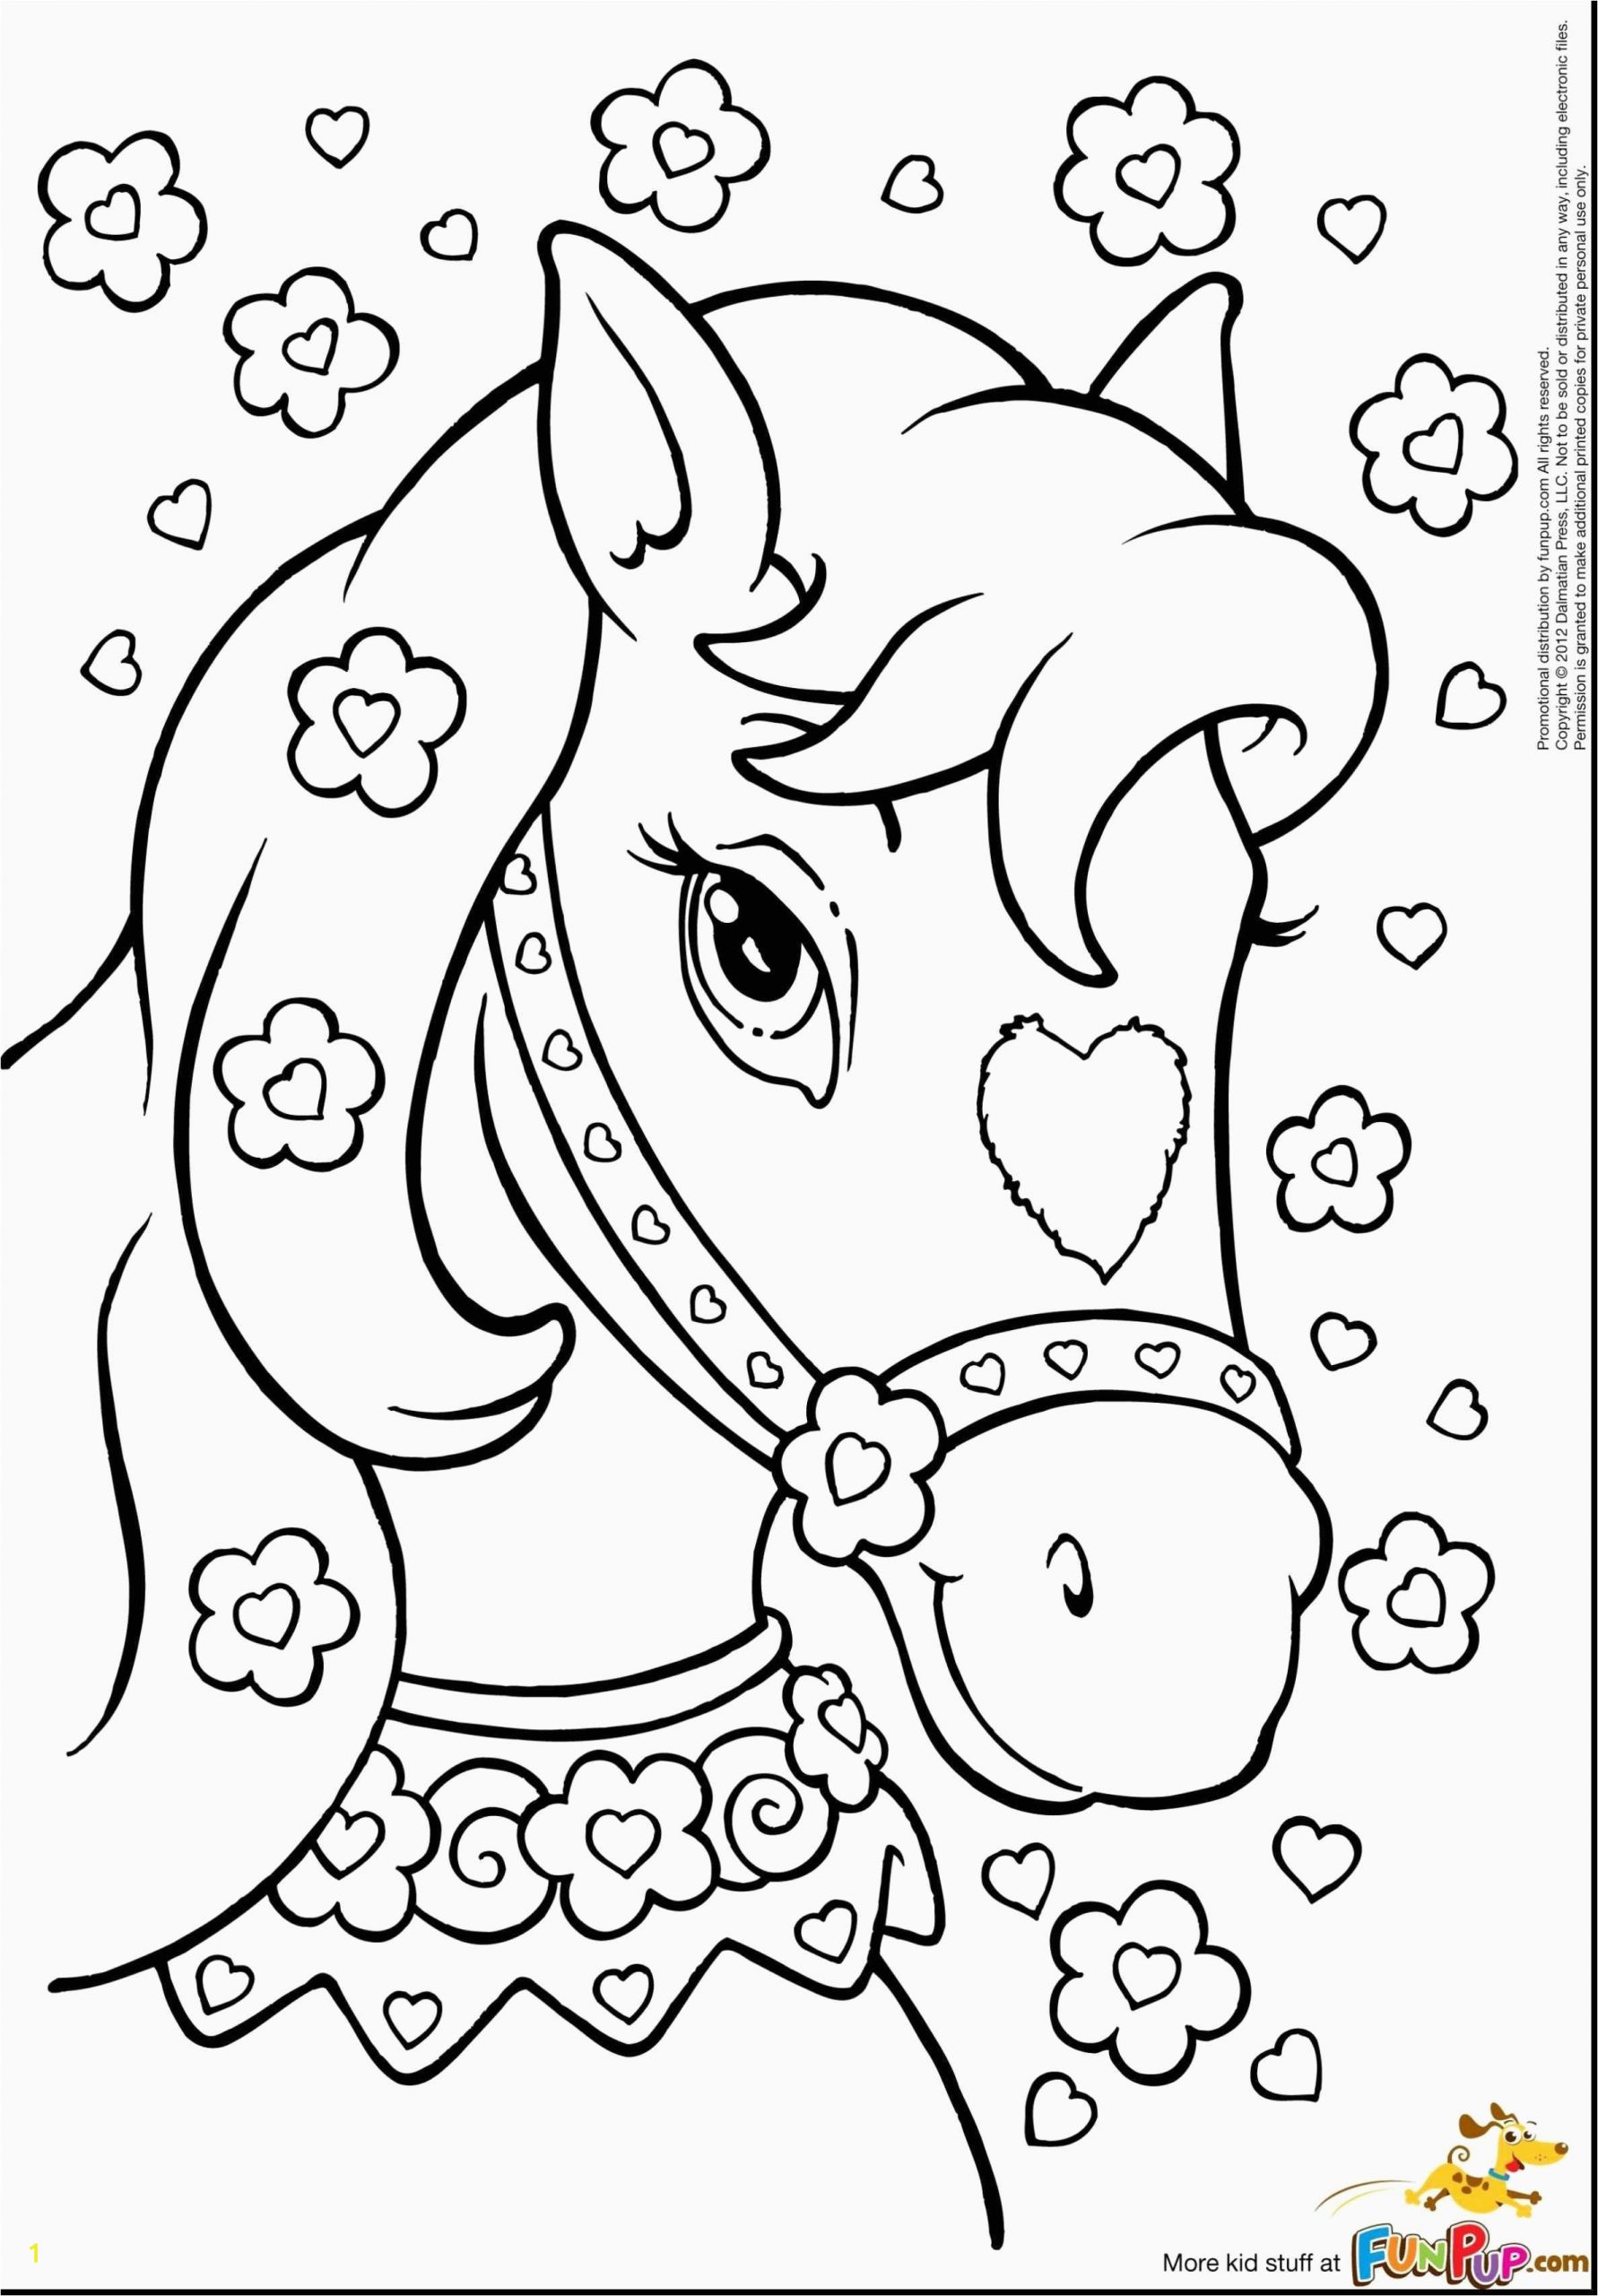 Easy Preschool Coloring Pages Coloring African Animals Beautiful Disney Princesses